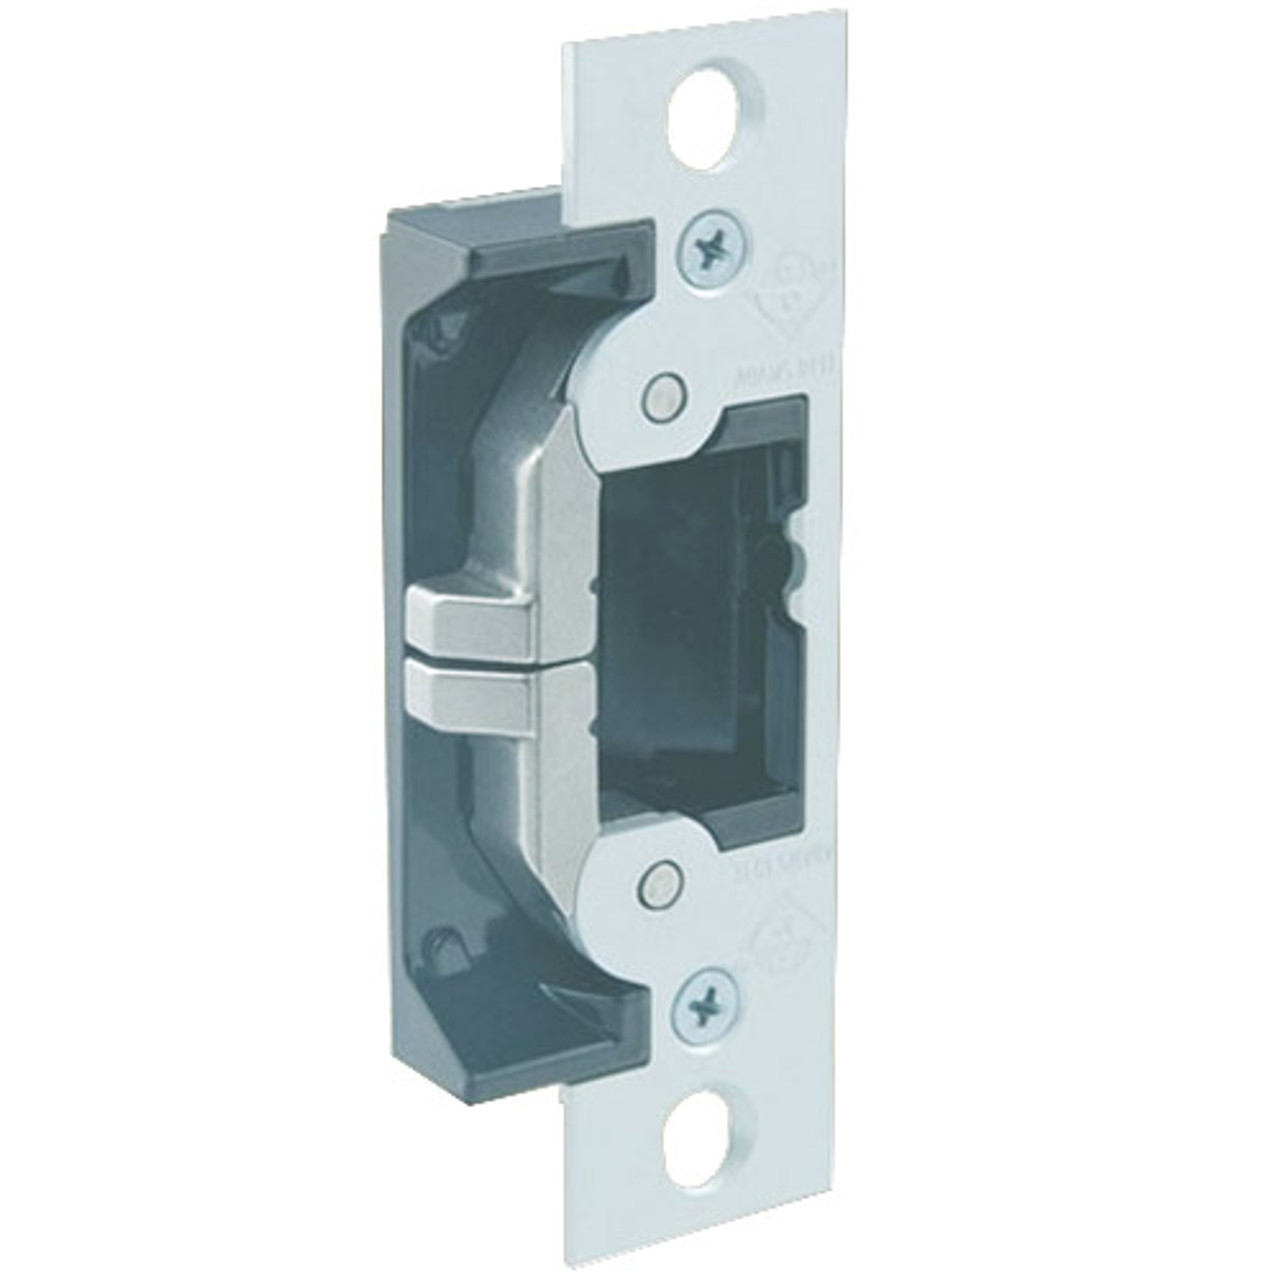 7440-628 Adams Rite UltraLine Electric Strike for steel and wood jambs and doors in Clear Anodized Finish